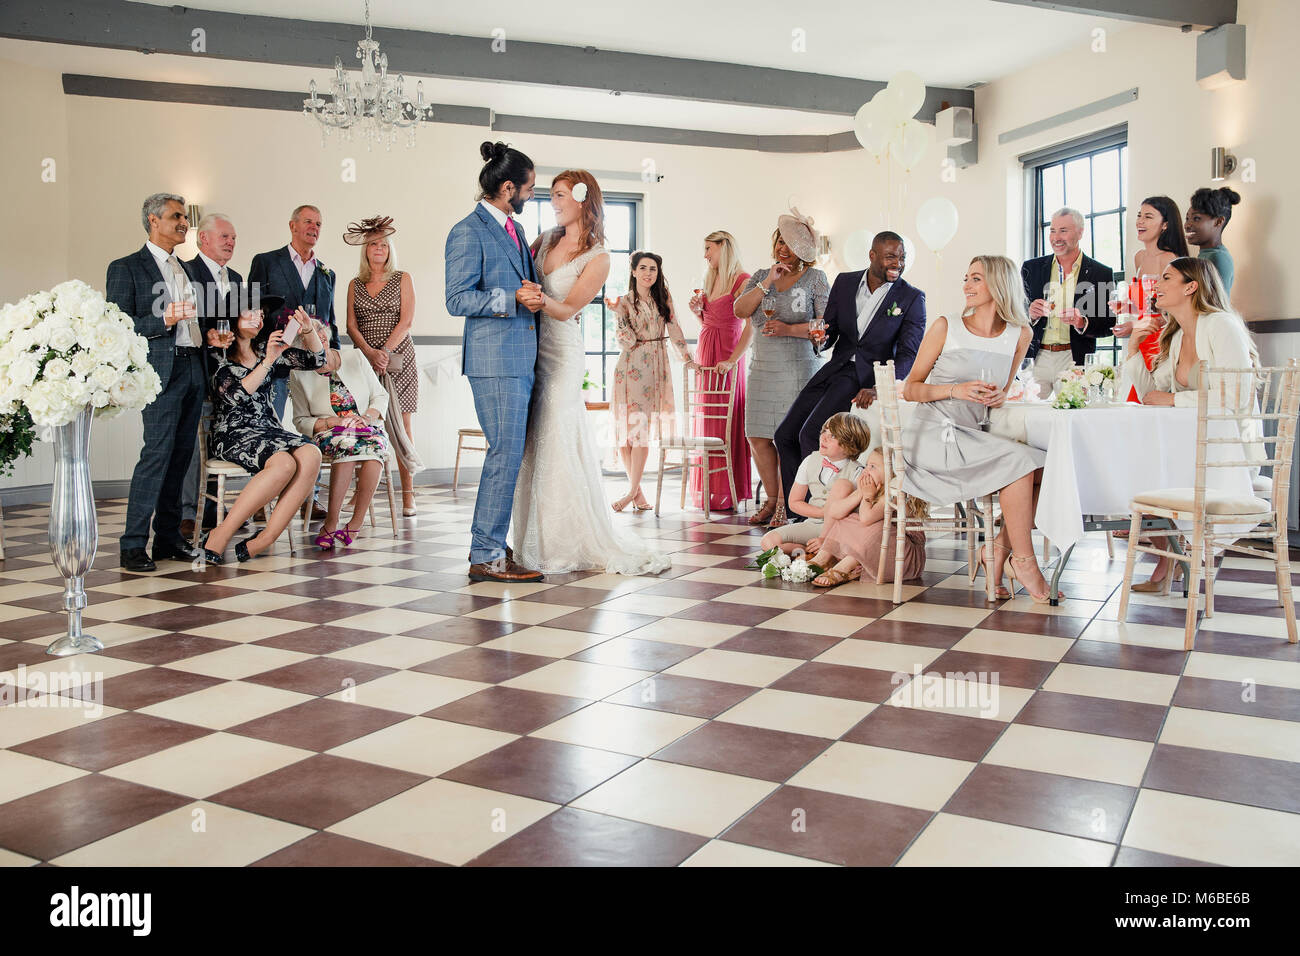 Beautiful couple are sharing their first dance on their wedding day. All of their guests are sitting around the dancefloor watching them. Stock Photo